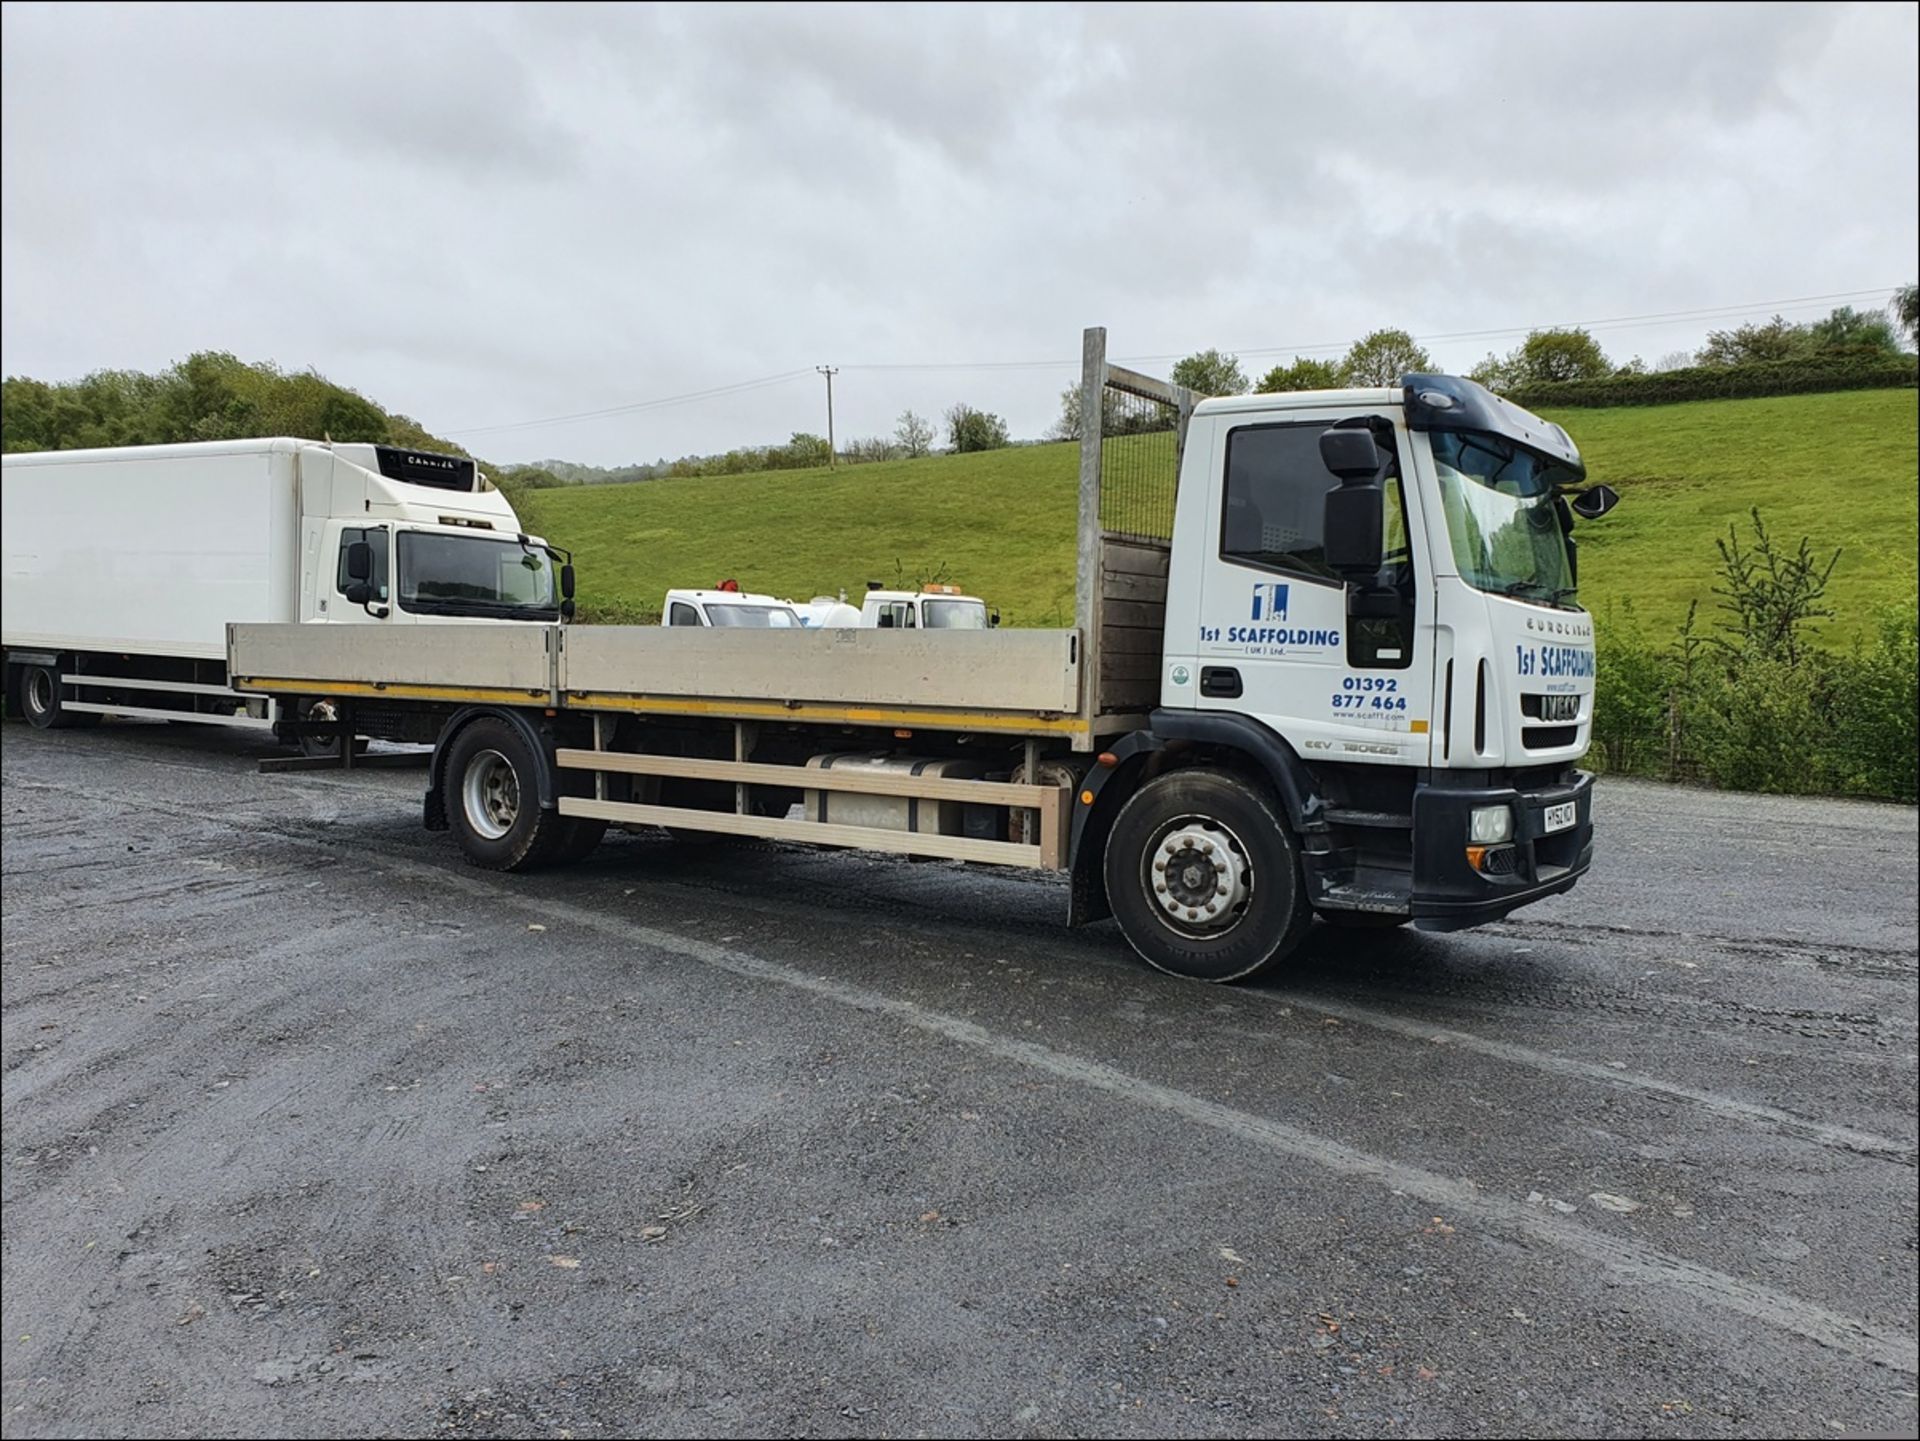 12/62 IVECO EUROCARGO (MY 2008) - 5880cc 2dr Flat Bed (White, 148k) - Image 4 of 16